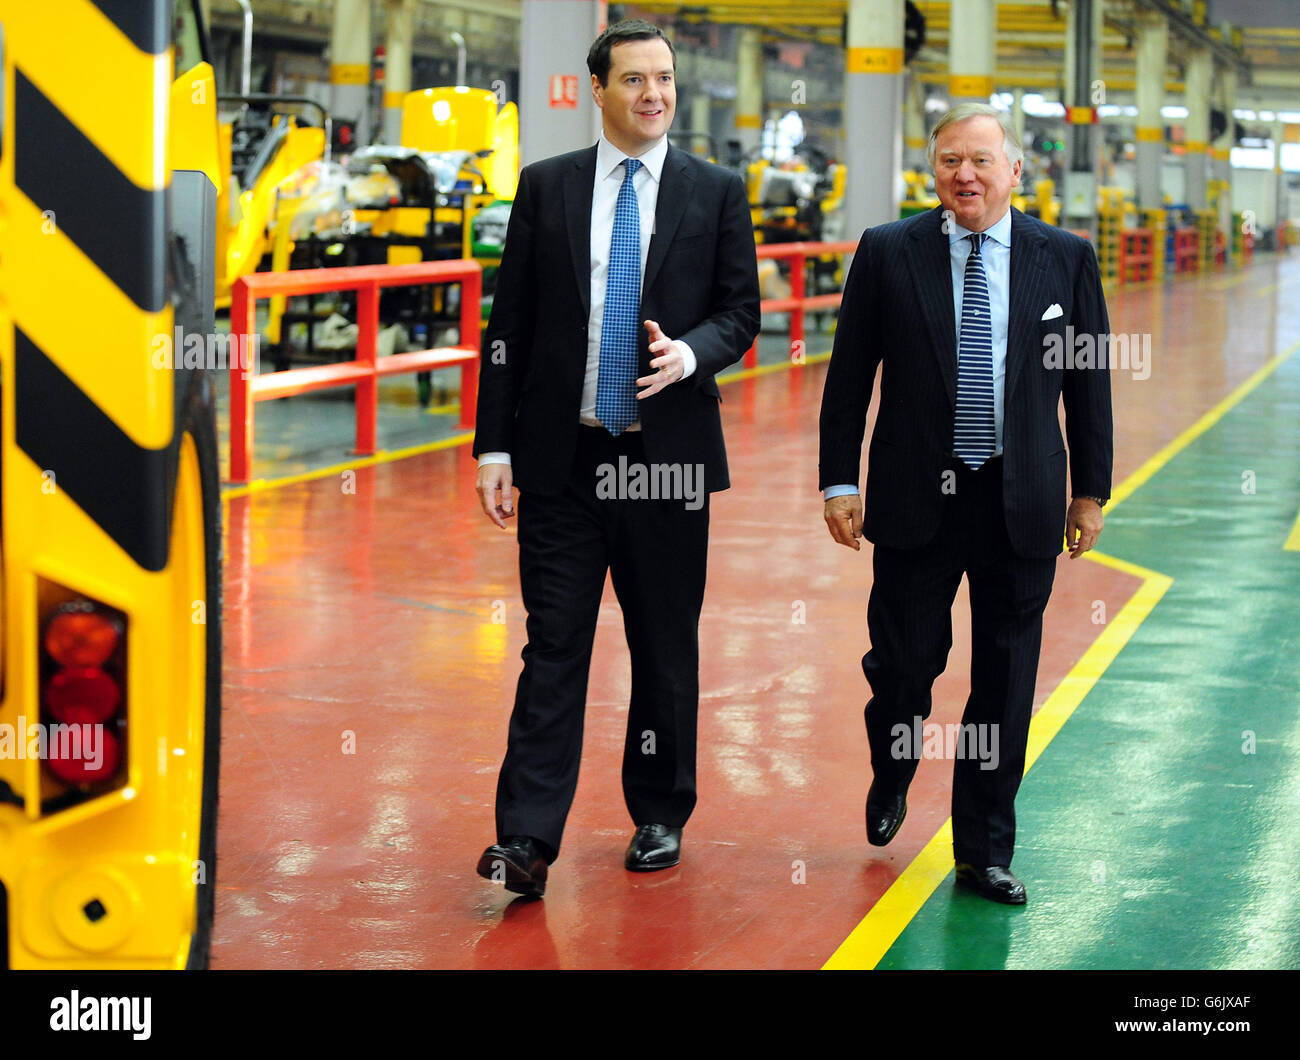 The Chancellor of the Exchequer George Osborne with JCB Chairman Lord Bamford (right) during a visit to JCB's backhoe loader factory in Rocester, Staffordshire. JCB announced today plans to invest &pound;150 million to expand its operations in Staffordshire and create an additional 2.500 jobs by 2018. Stock Photo